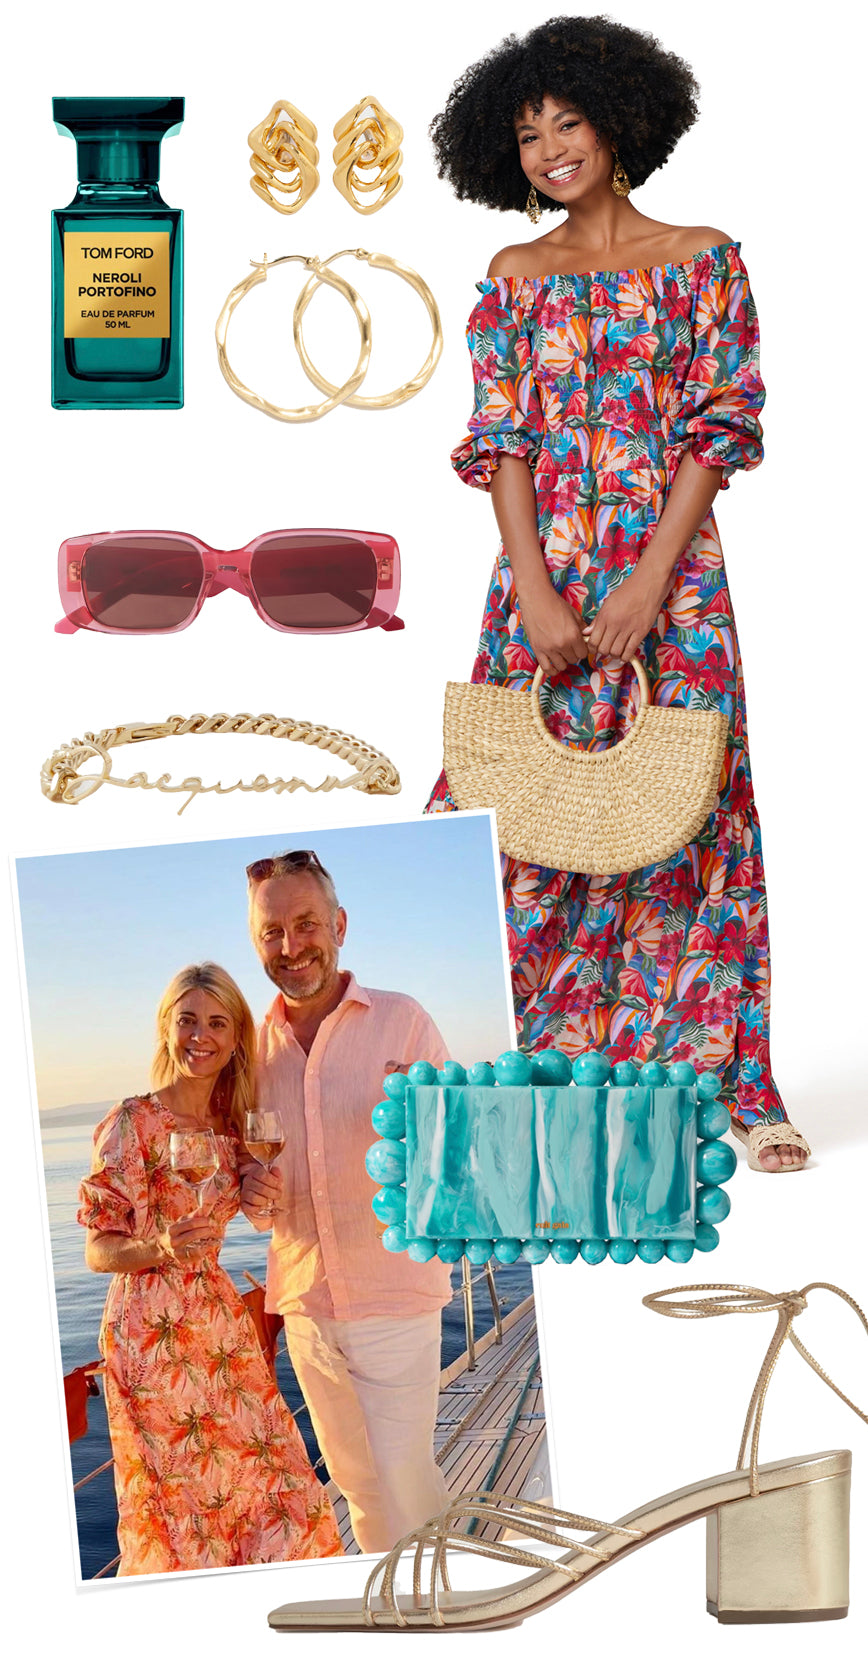 ridleylondon-statment-summer-holiday-printed-floral-silk-maxi-dress-with-accessories